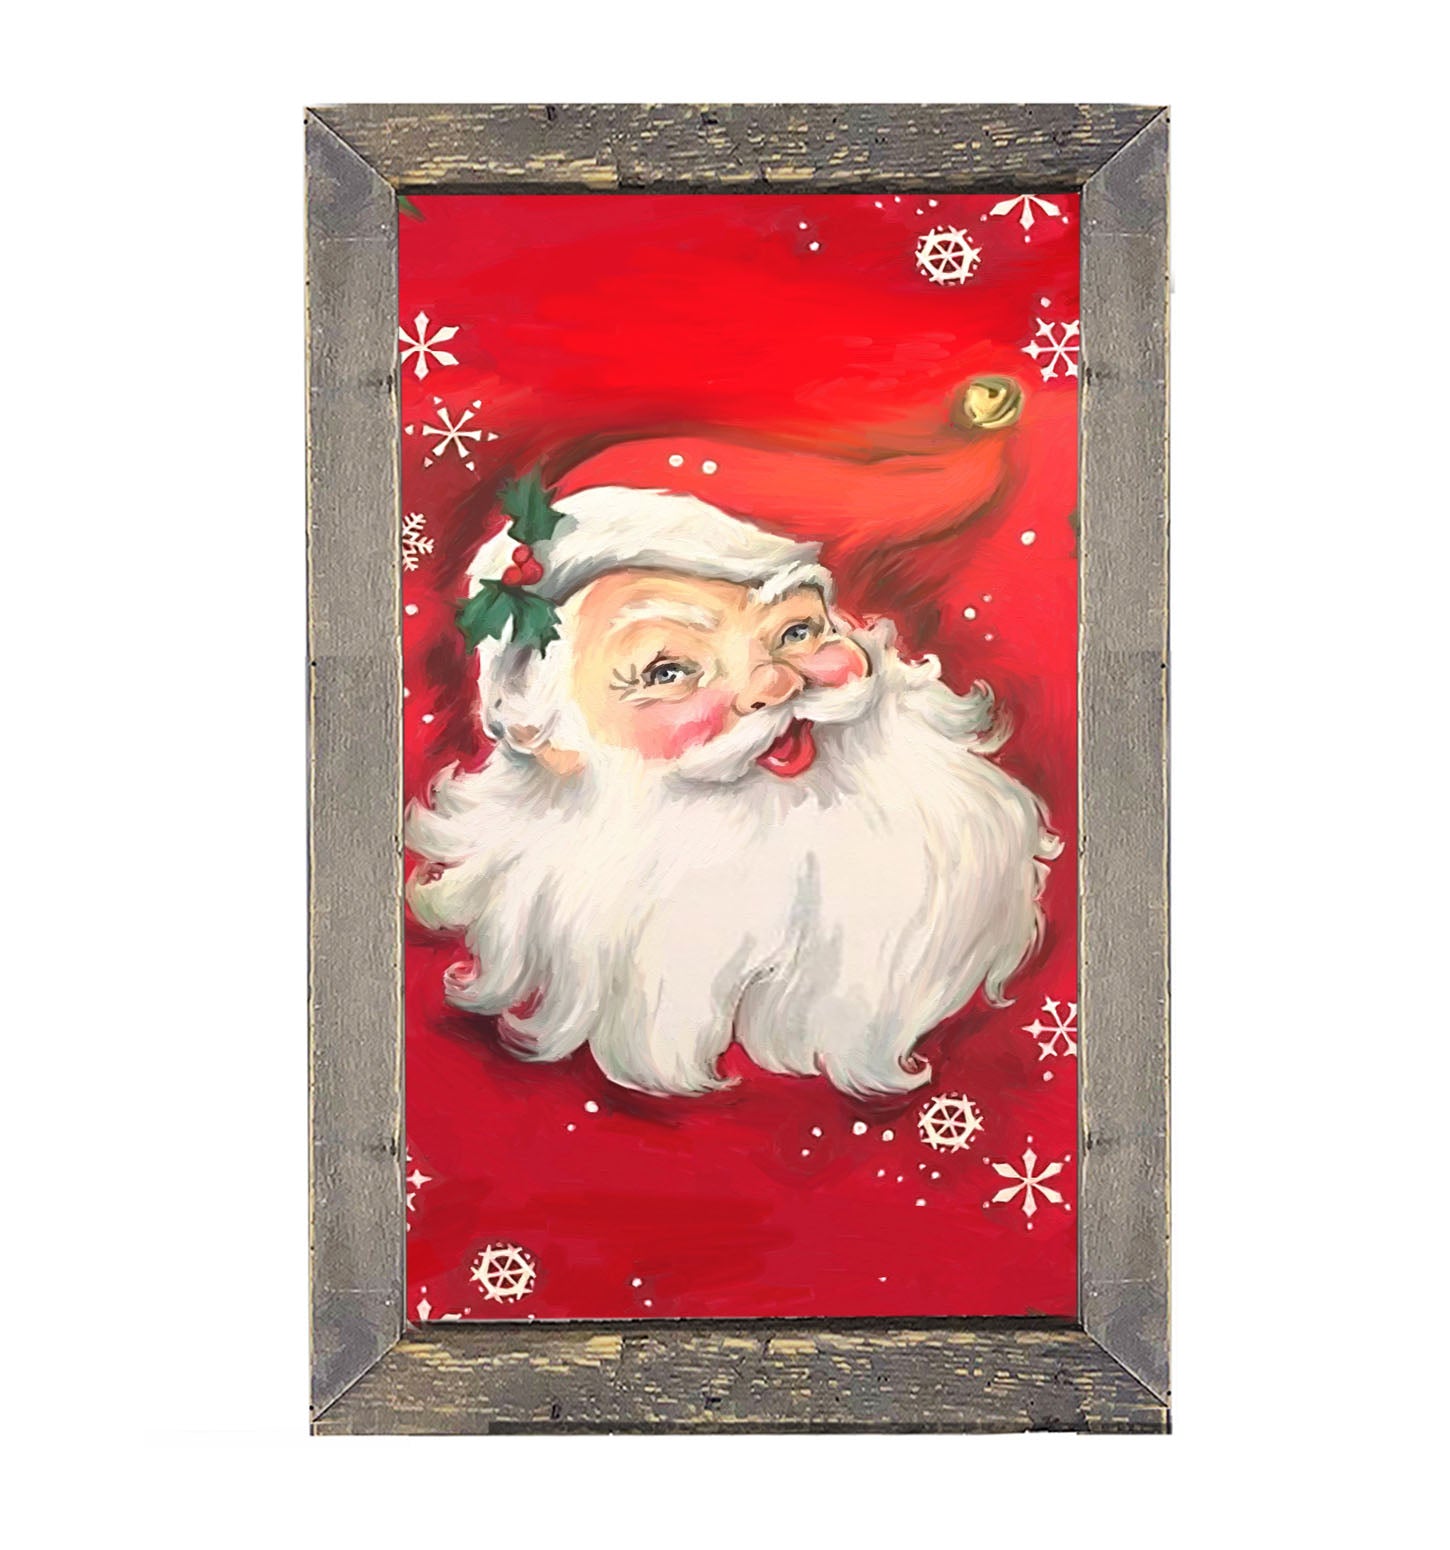 Red Santa with snowflakes